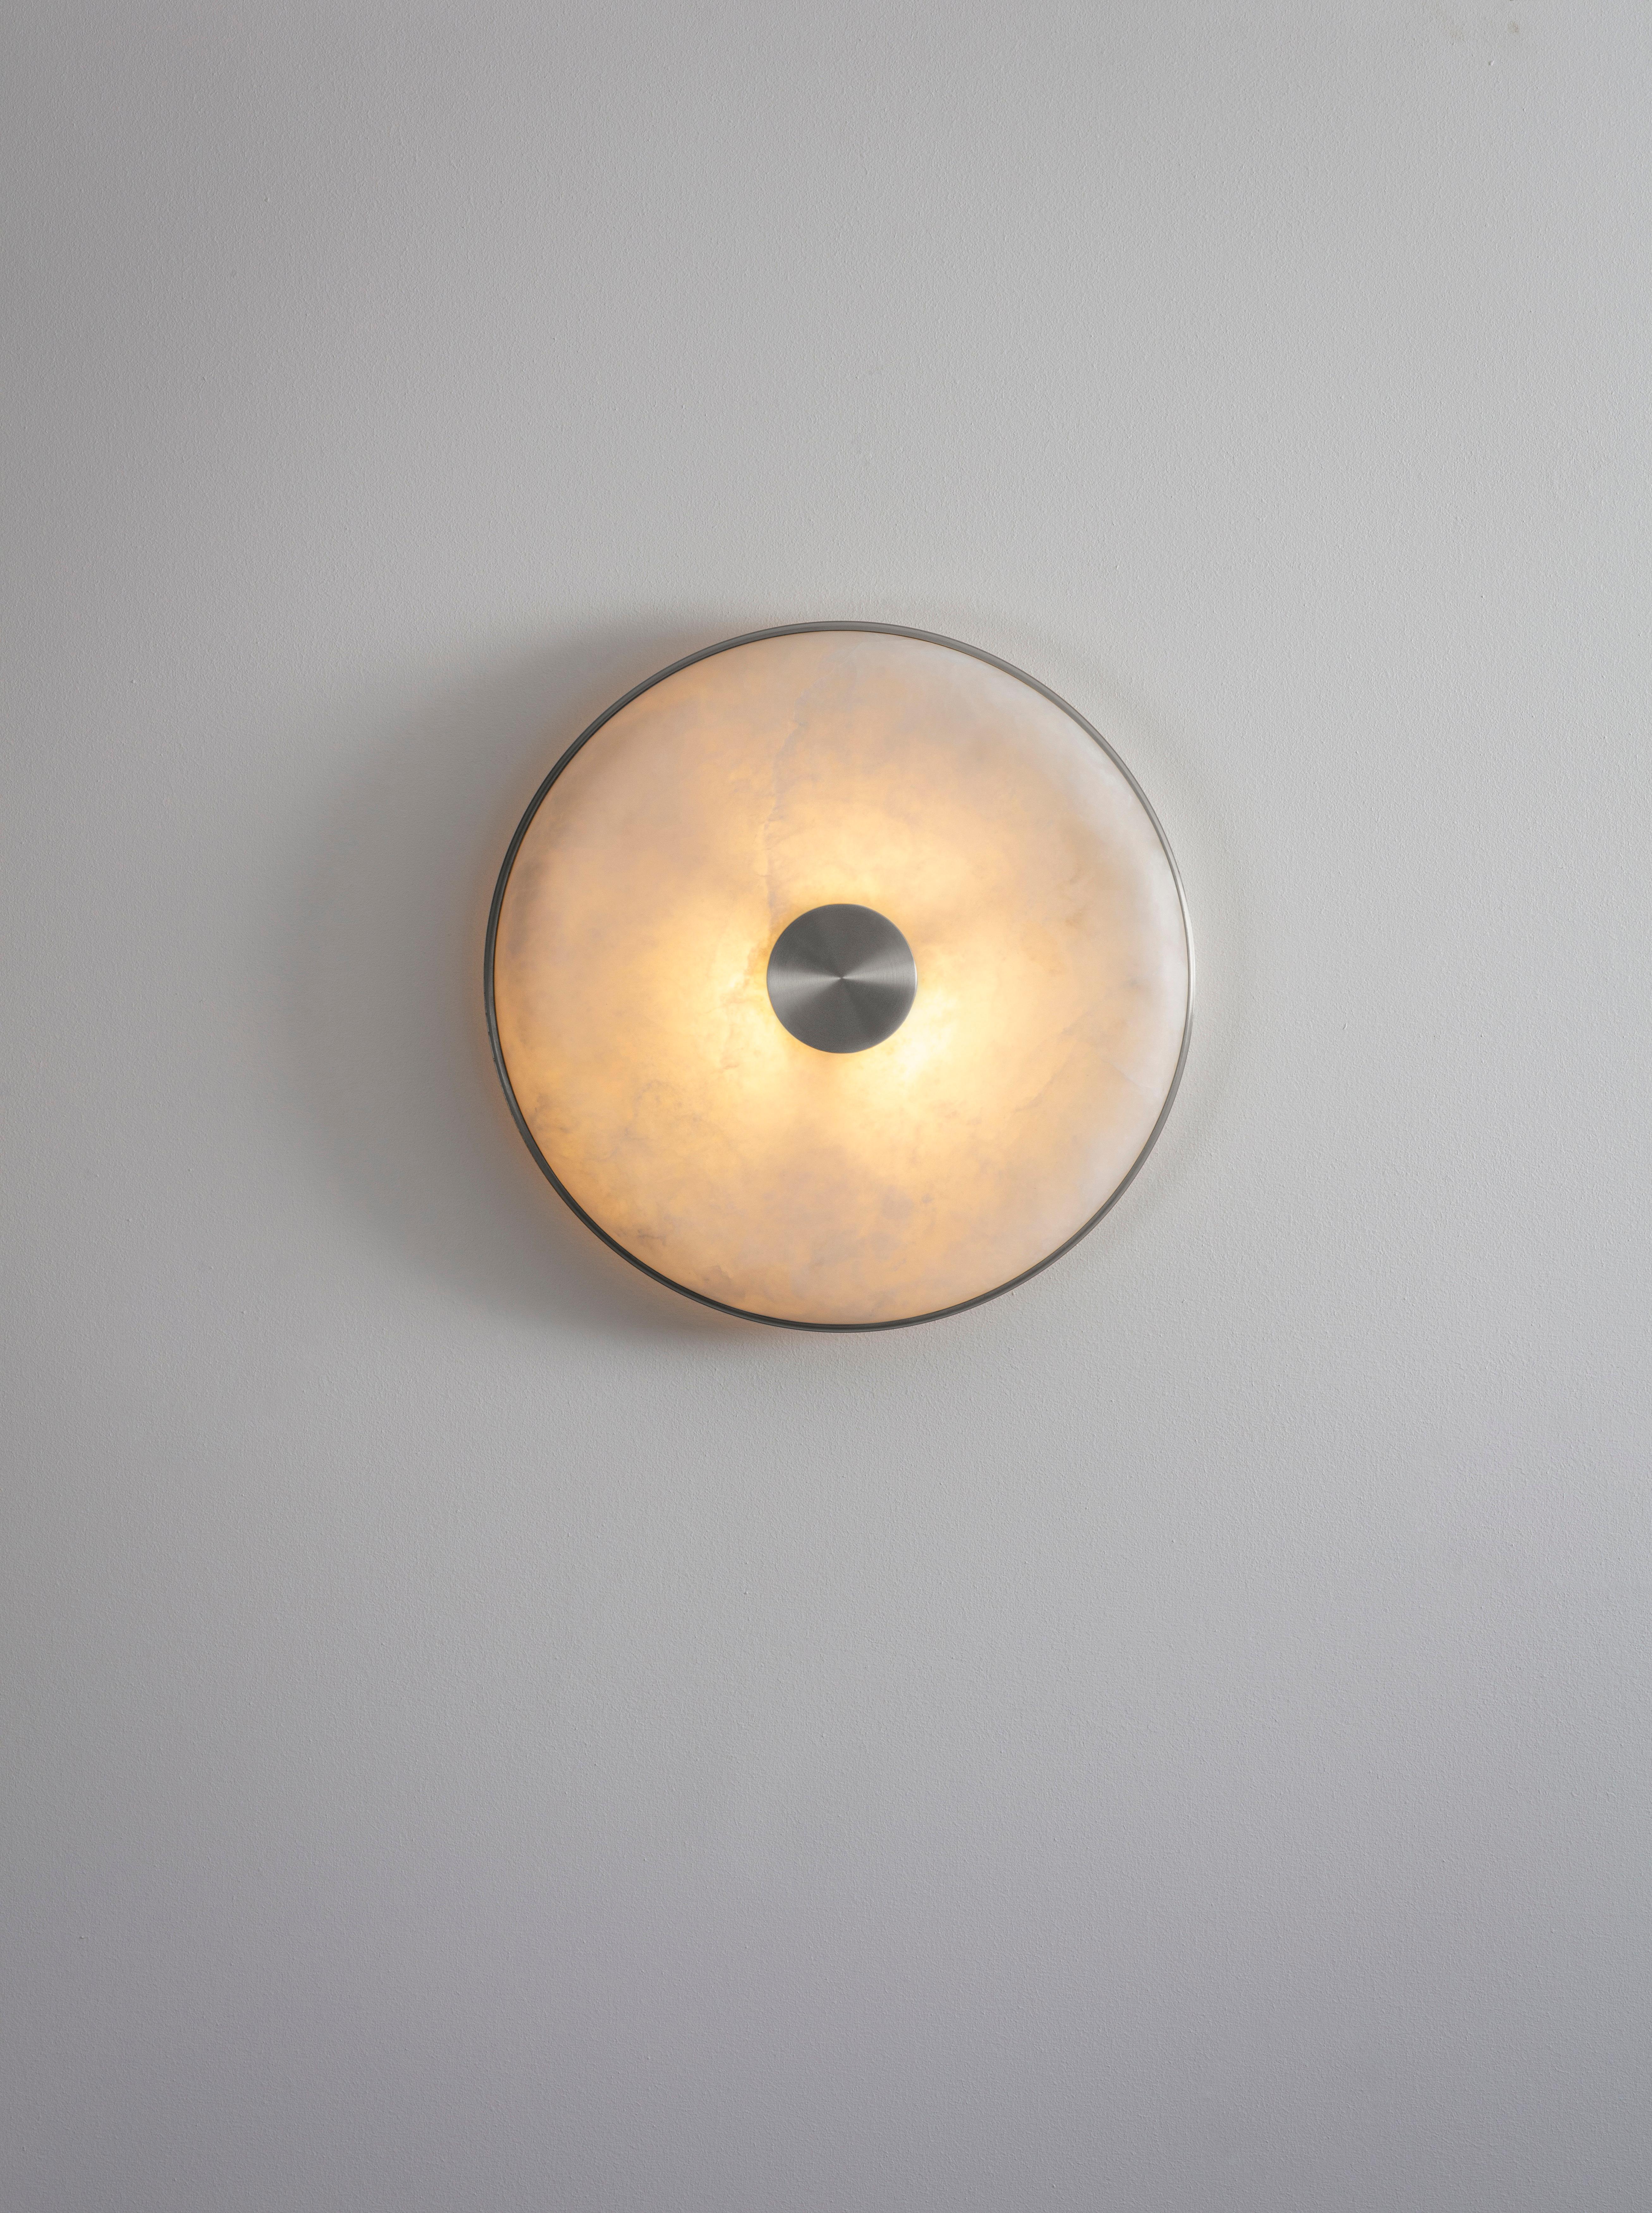 Beran wall light nickel large by Bert Frank
Dimensions: ?36 x 6cm
Materials: Nickel


All our lamps can be wired according to each country. If sold to the USA it will be wired for the USA for instance.

When Adam Yeats and Robbie Llewellyn